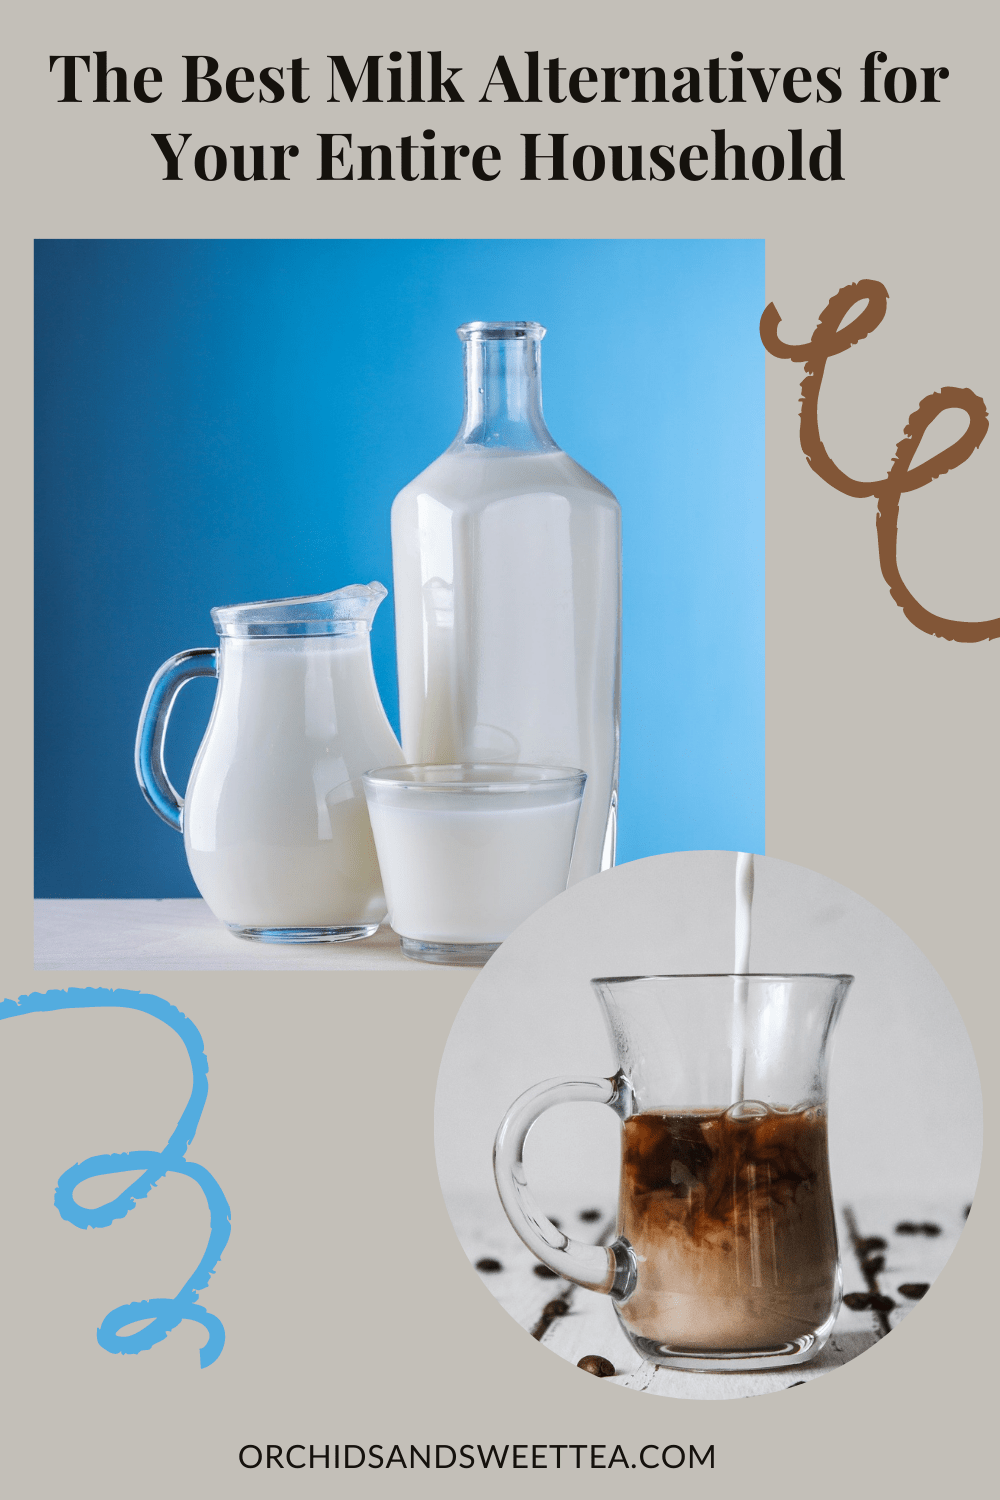 The Best Milk Alternatives for Your Entire Household